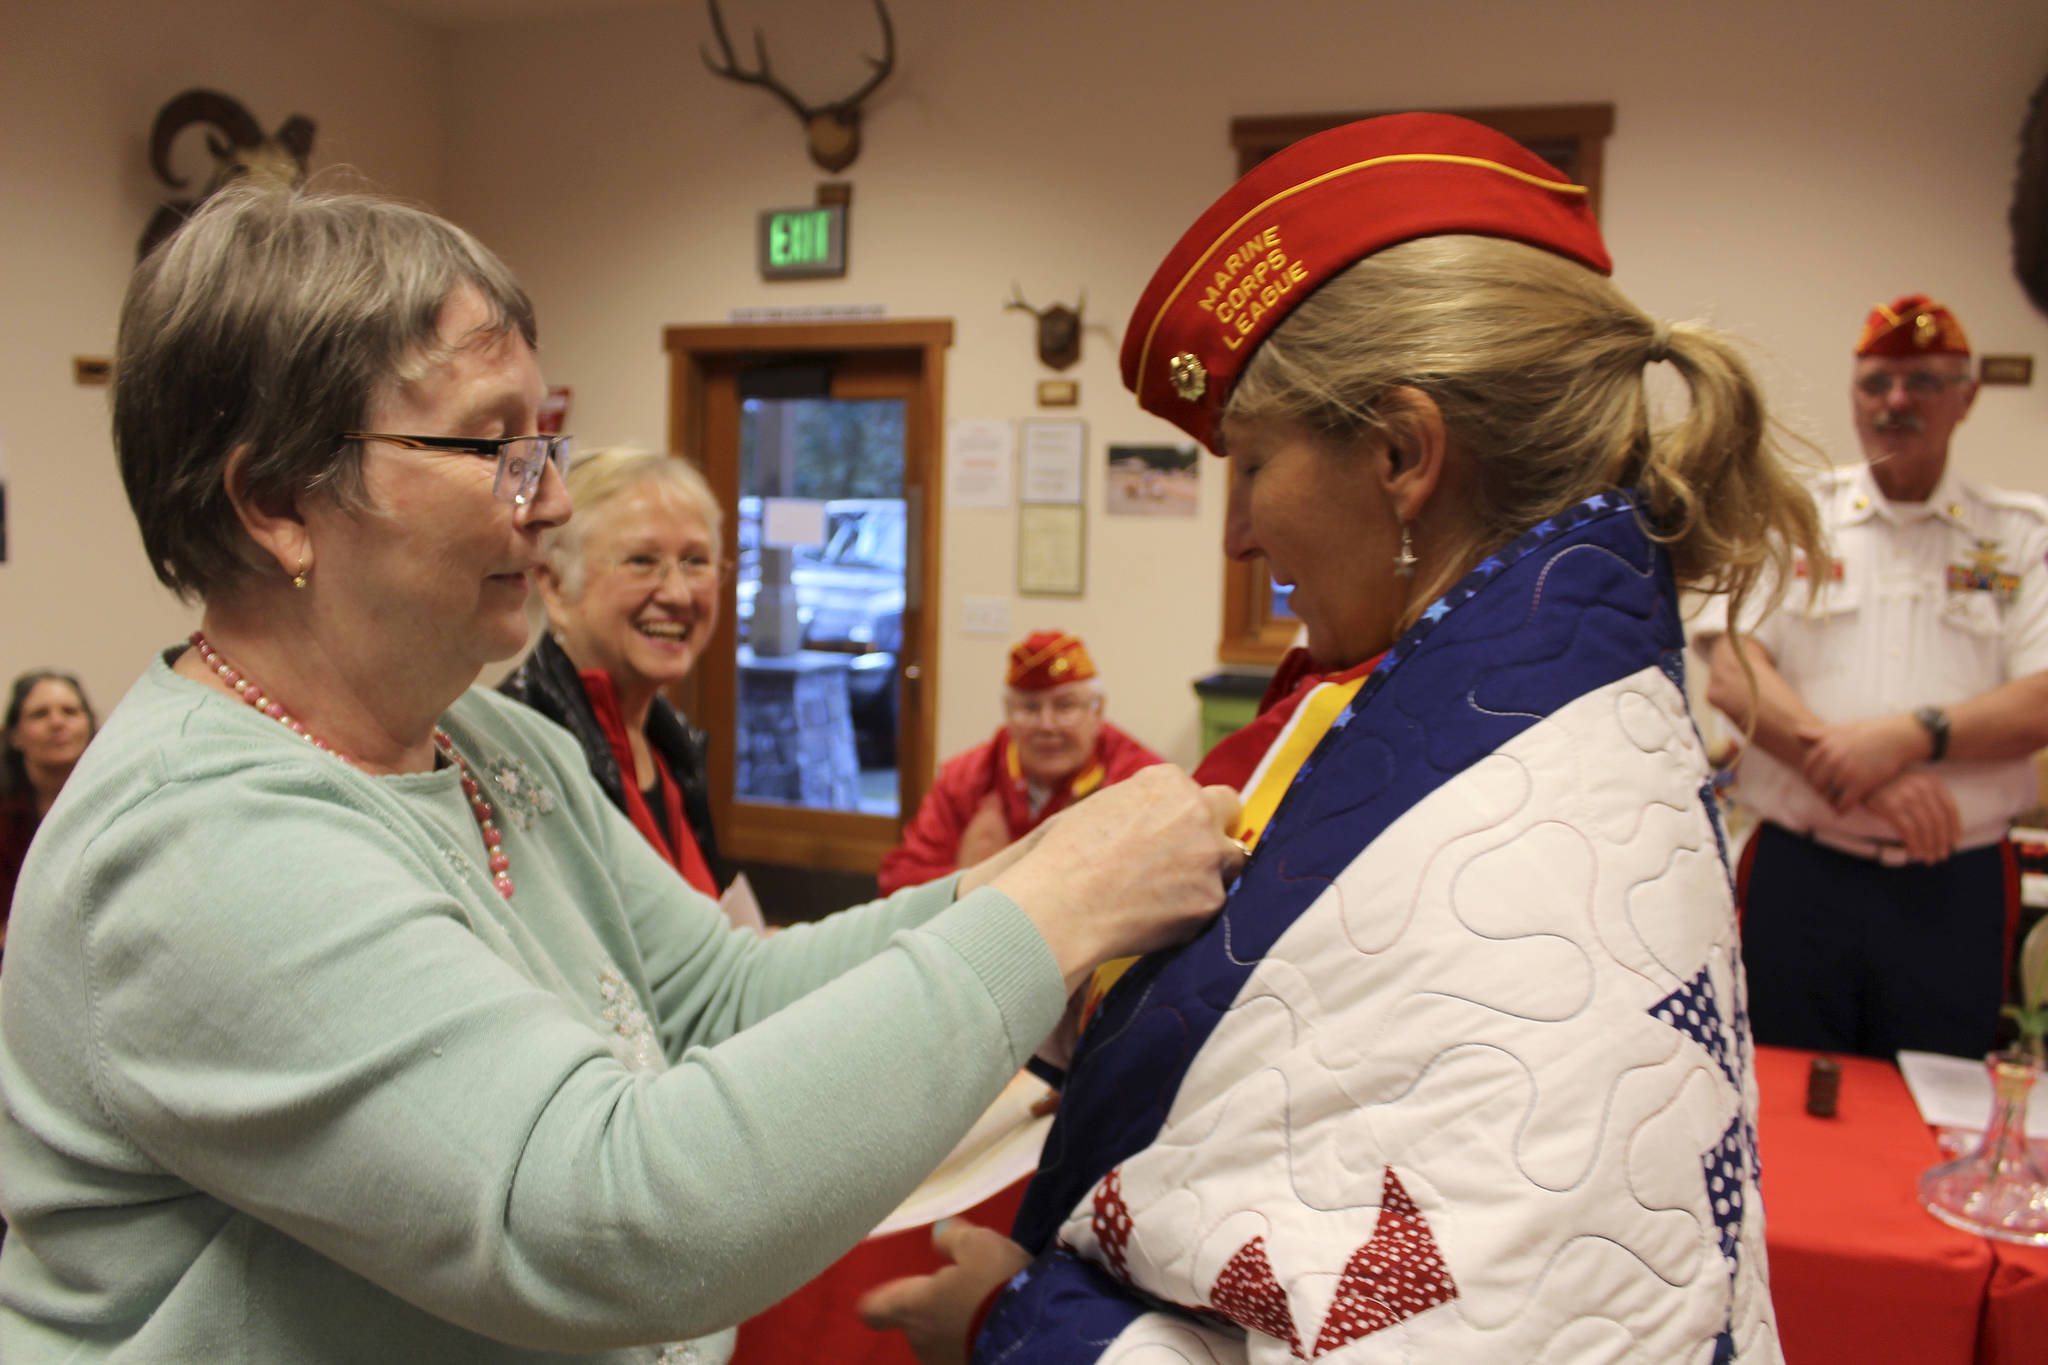 Anita Smith, founder of Quilts for Veterans, removes the name on the quilt after it was presented to “M.J.” Margaret Johns.